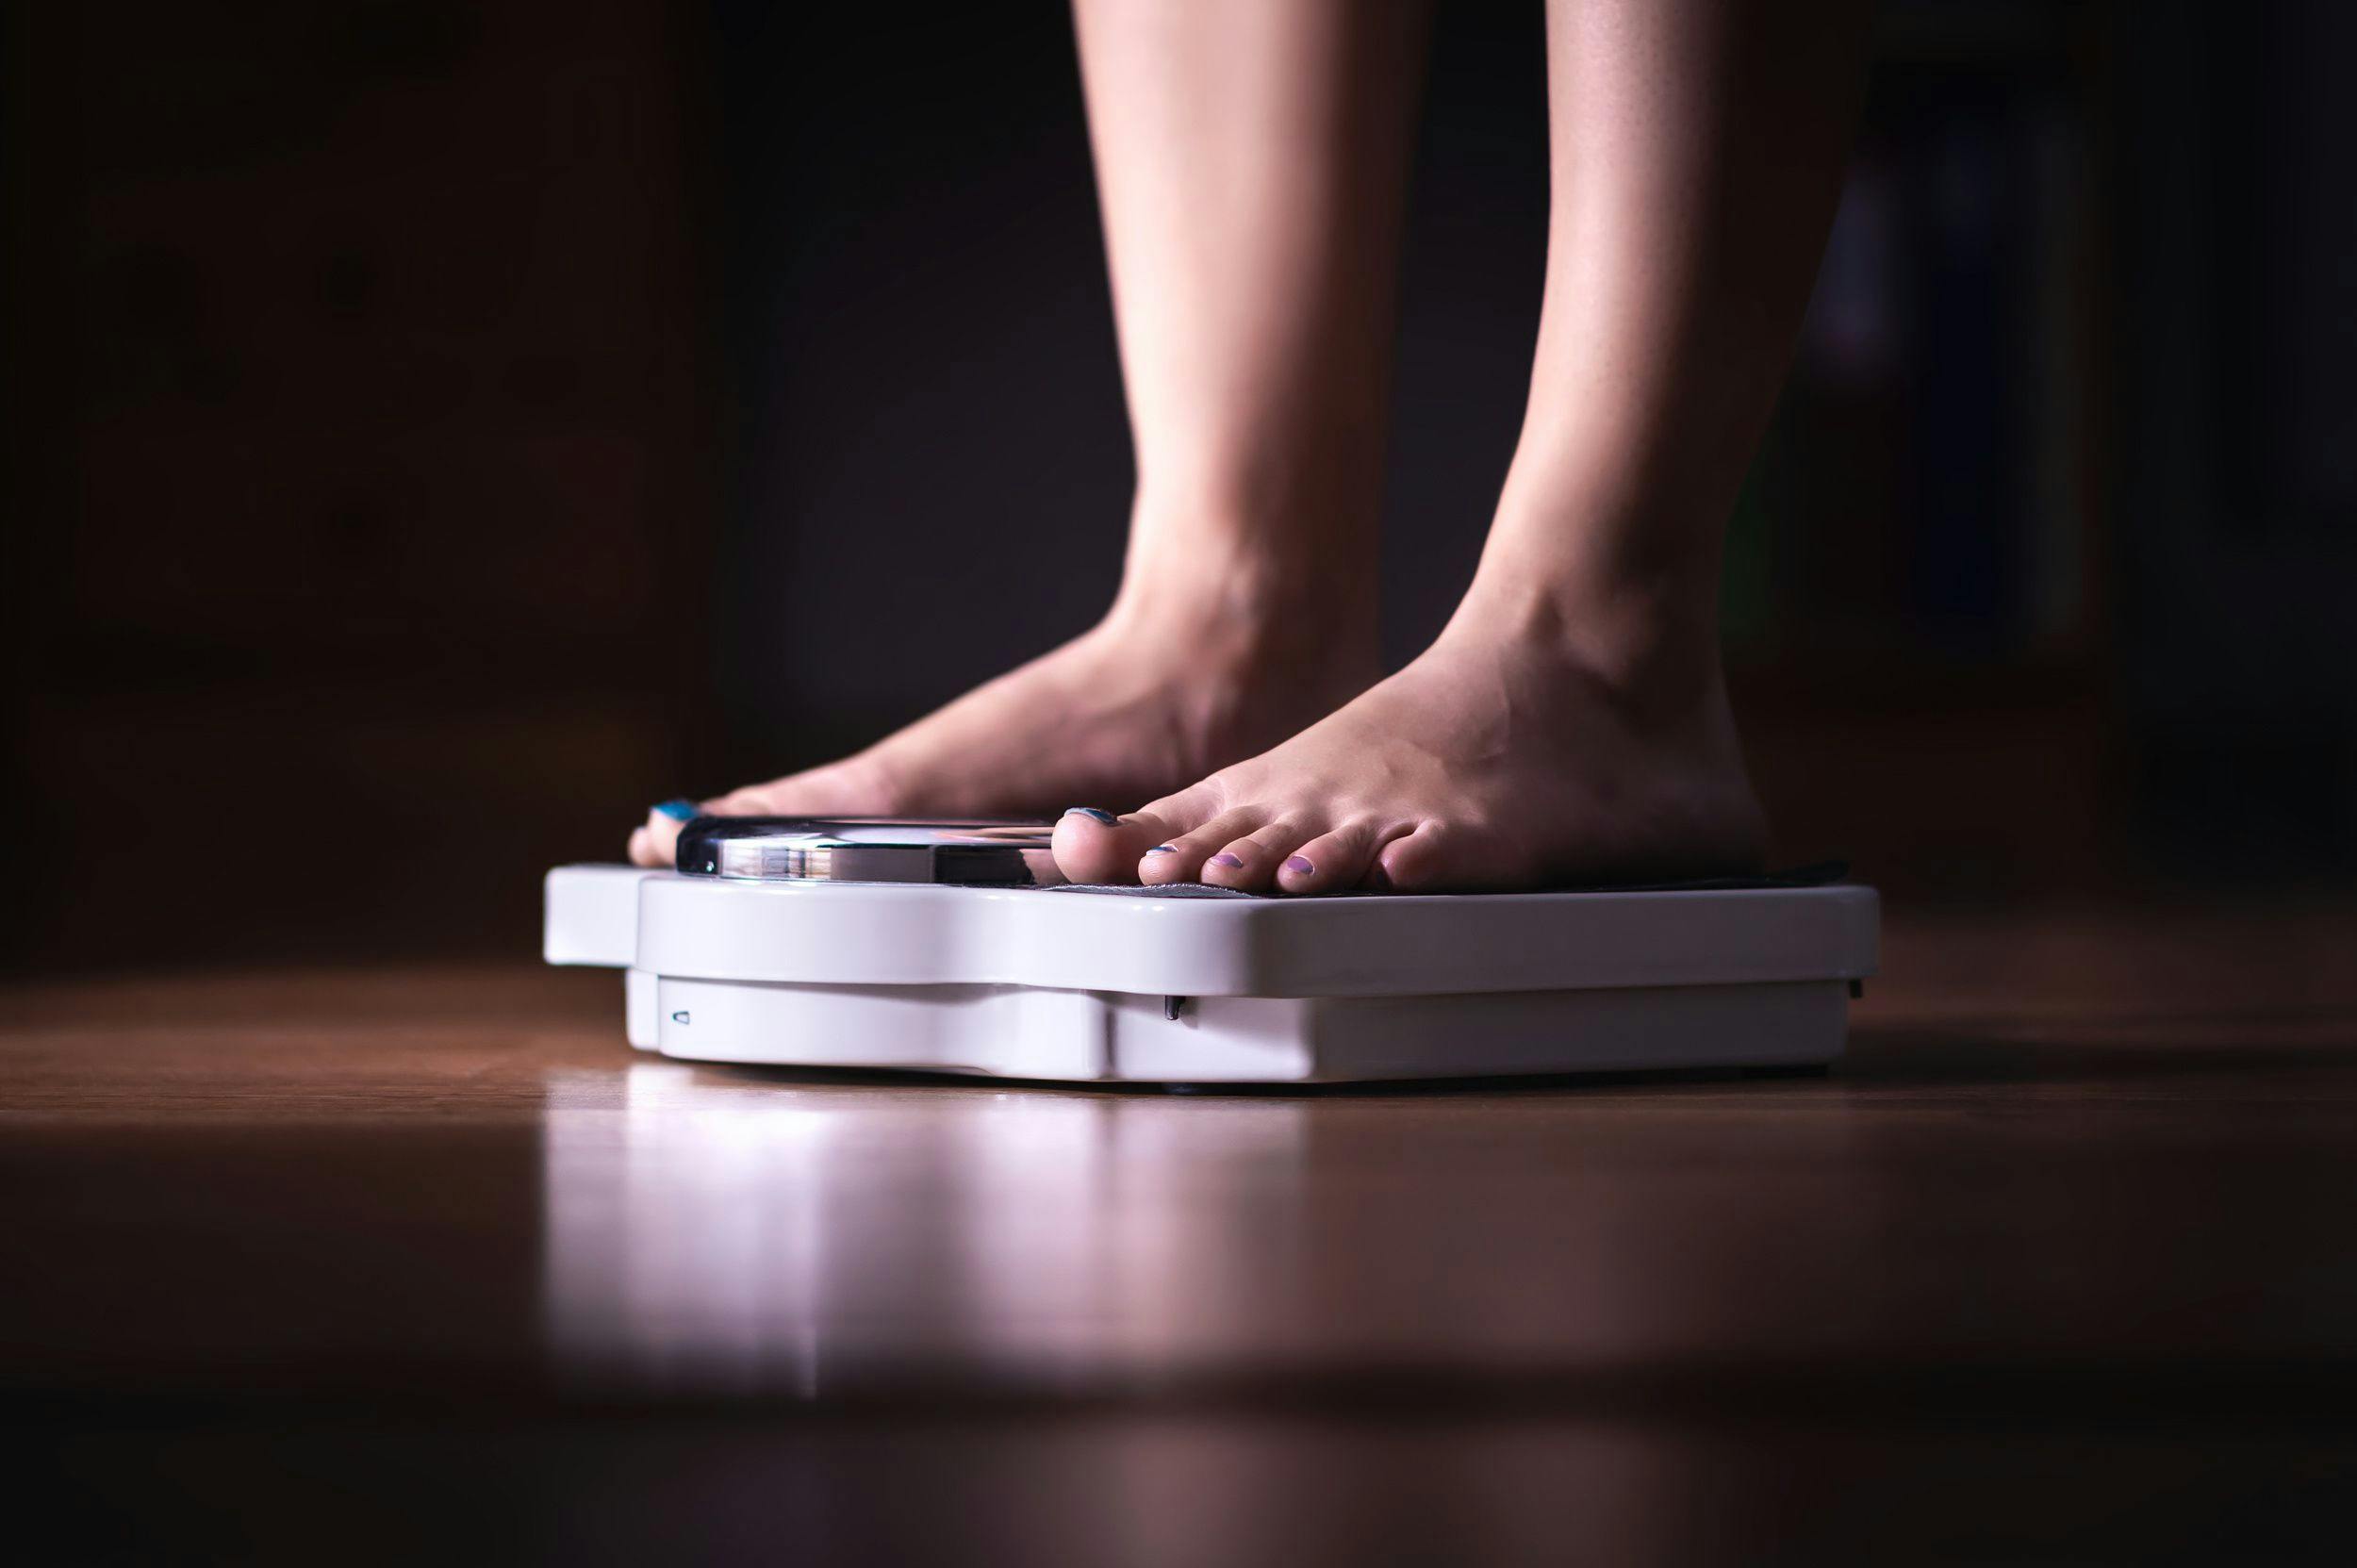 Will this medication make me gain weight? Researchers analyzed response to antidepressant treatment as a predictor of incident metabolic syndrome in a cohort of patients with depression.